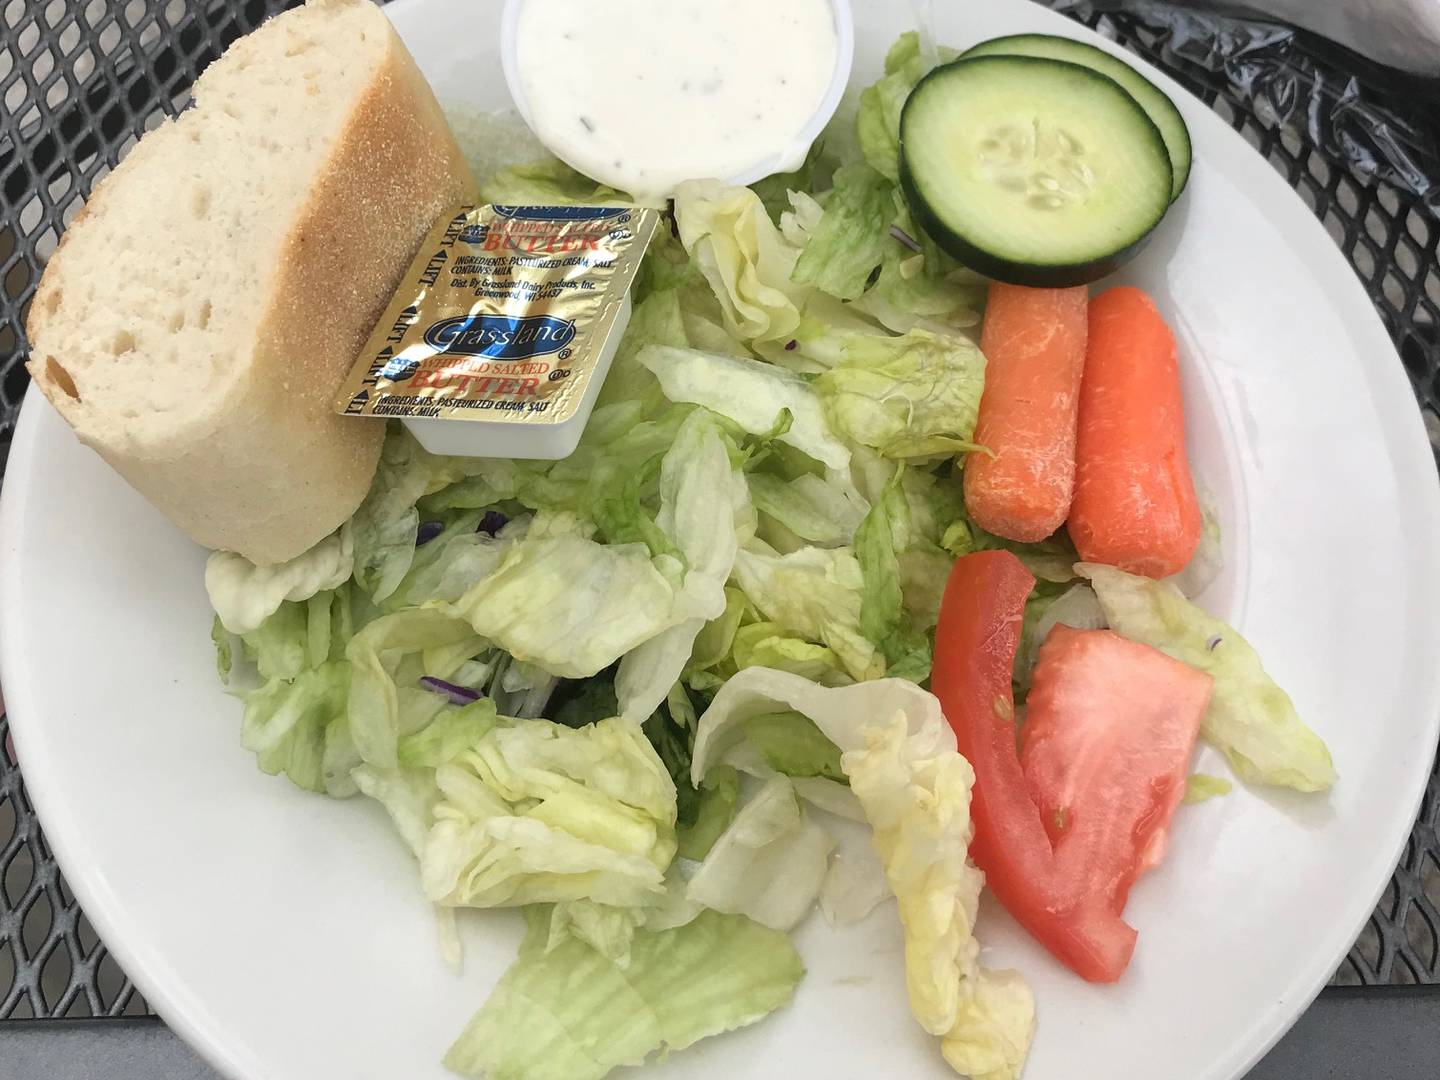 Entrees at Skoog's Pub & Grill come with a generously-sized side salad.